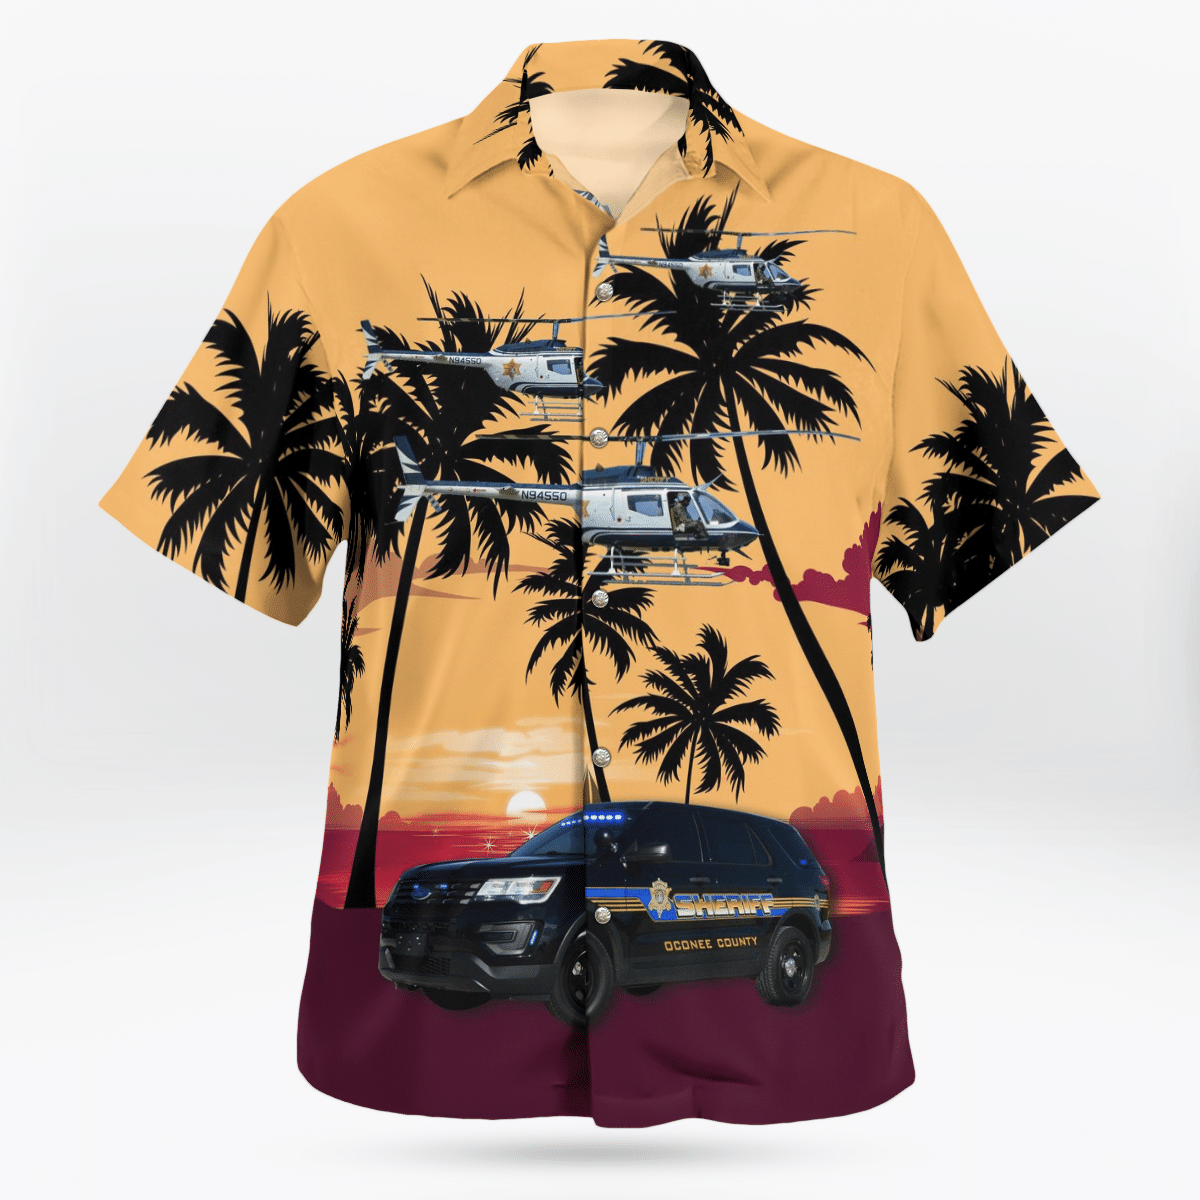 Hawaiian shirts never go out of style 7